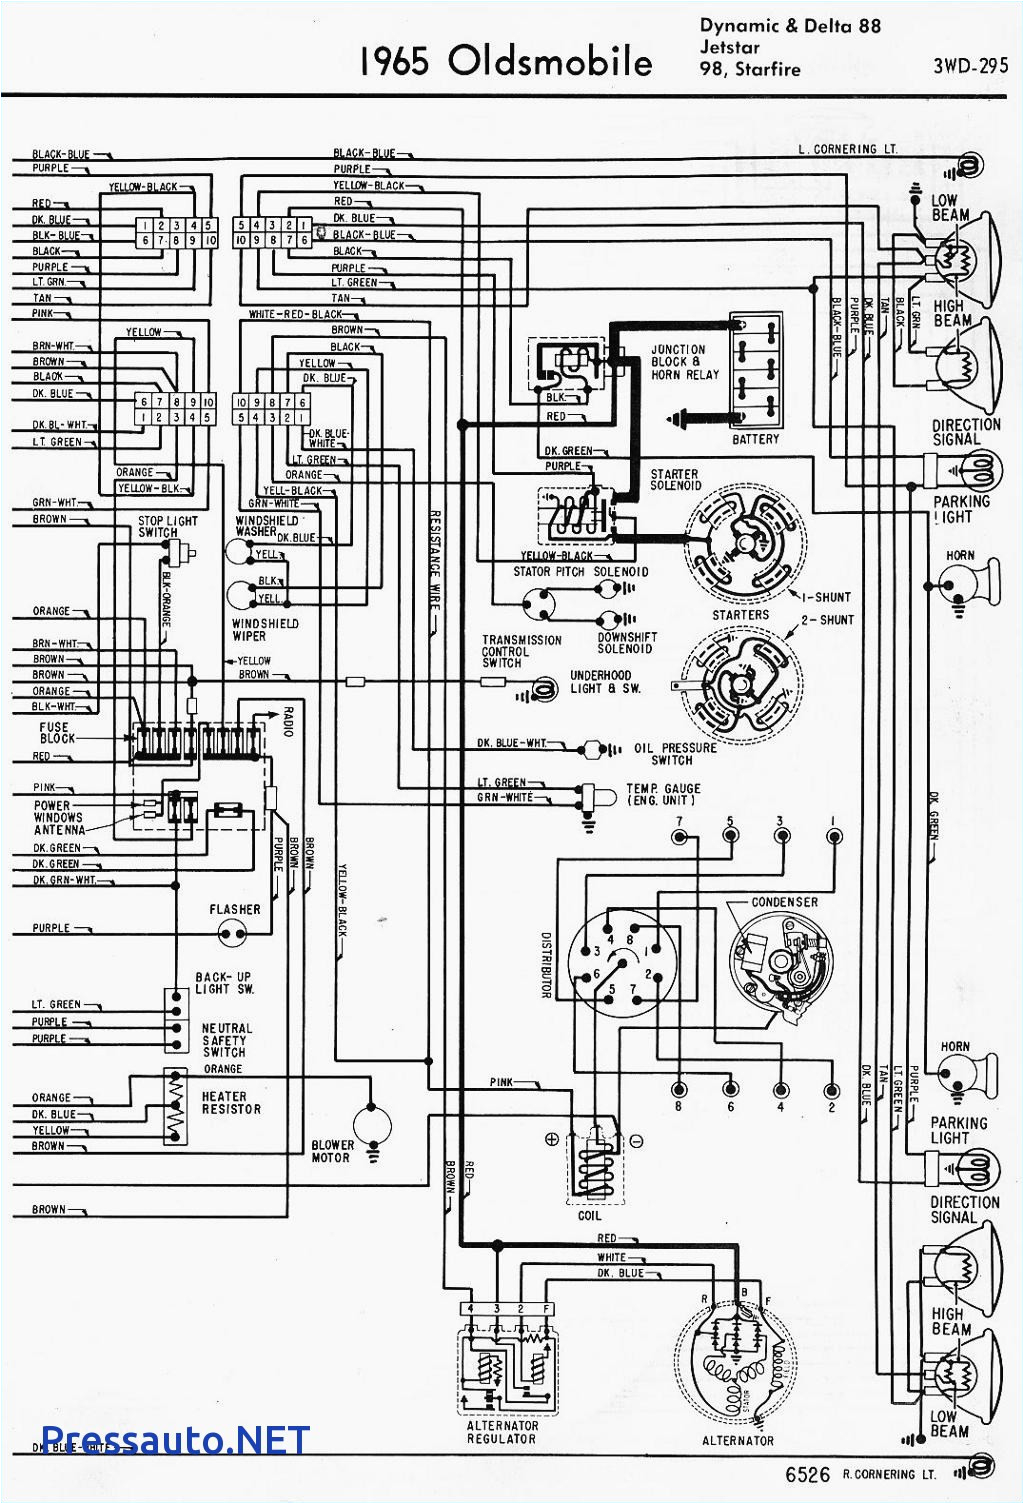 case 580 backhoe wiring diagram awesome case backhoe parts diagram case 580 n backhoe wiring diagram soundr